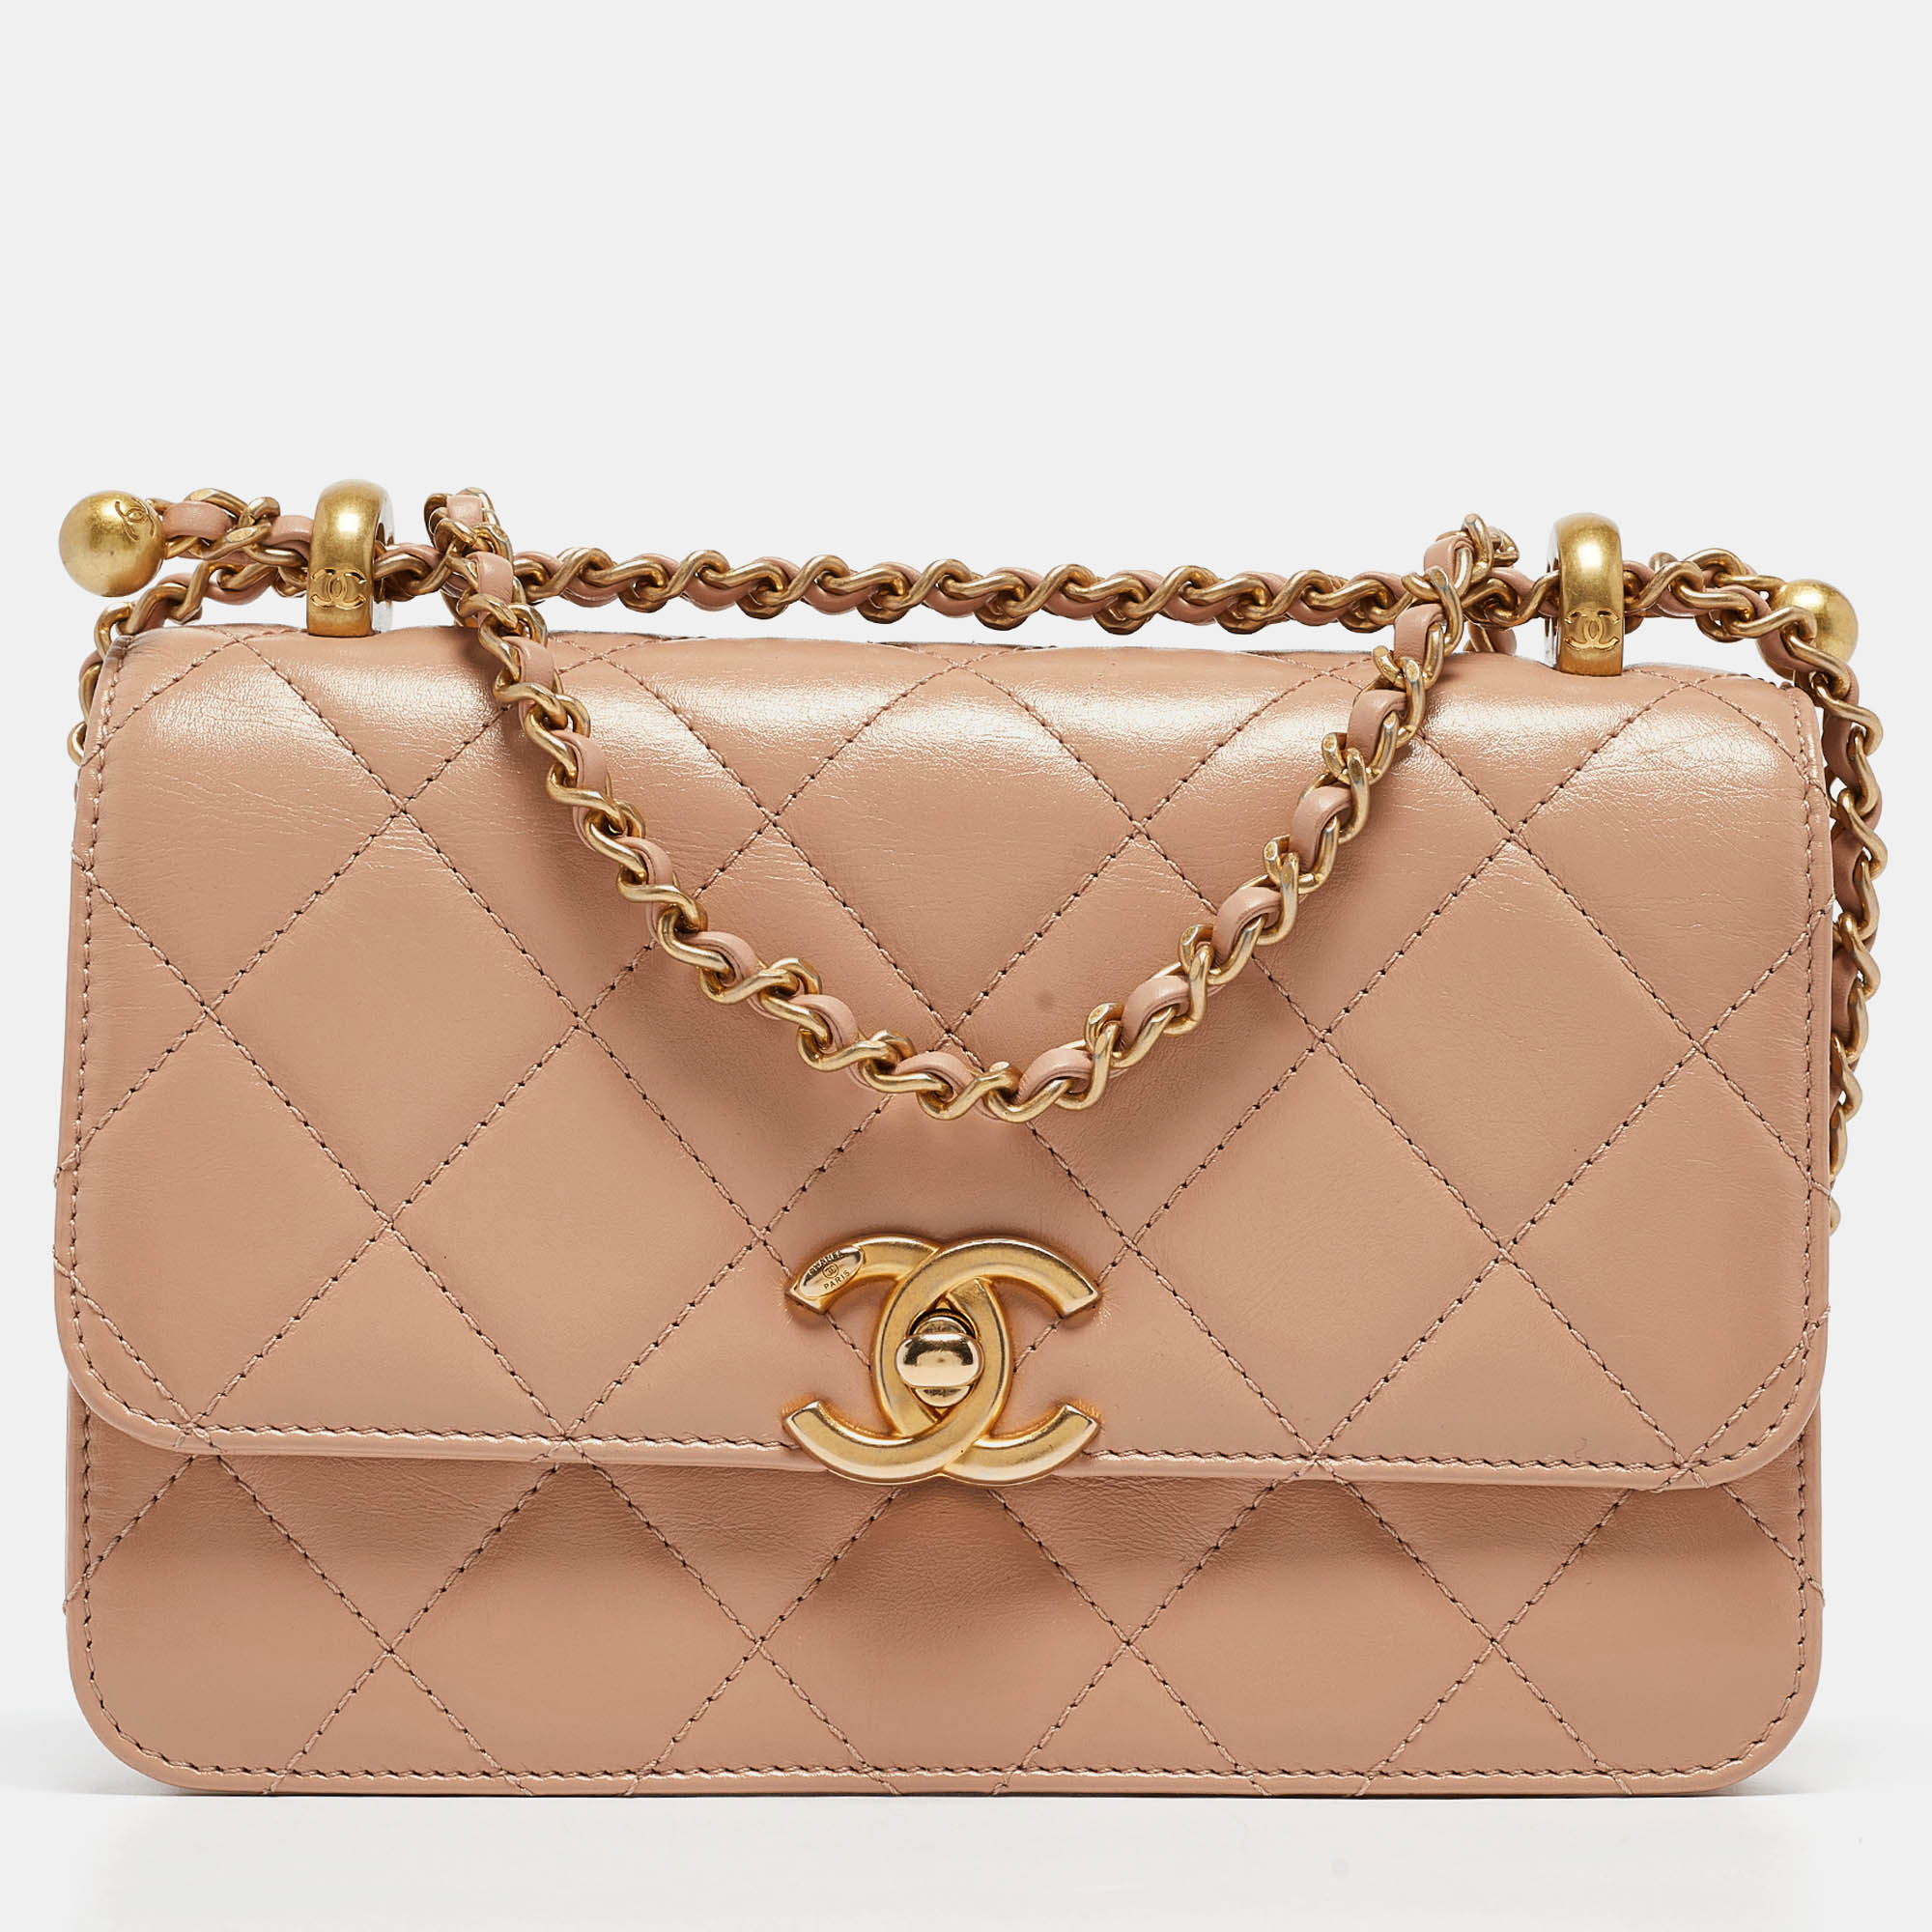 Chanel beige quilted leather perfect fit flap bag